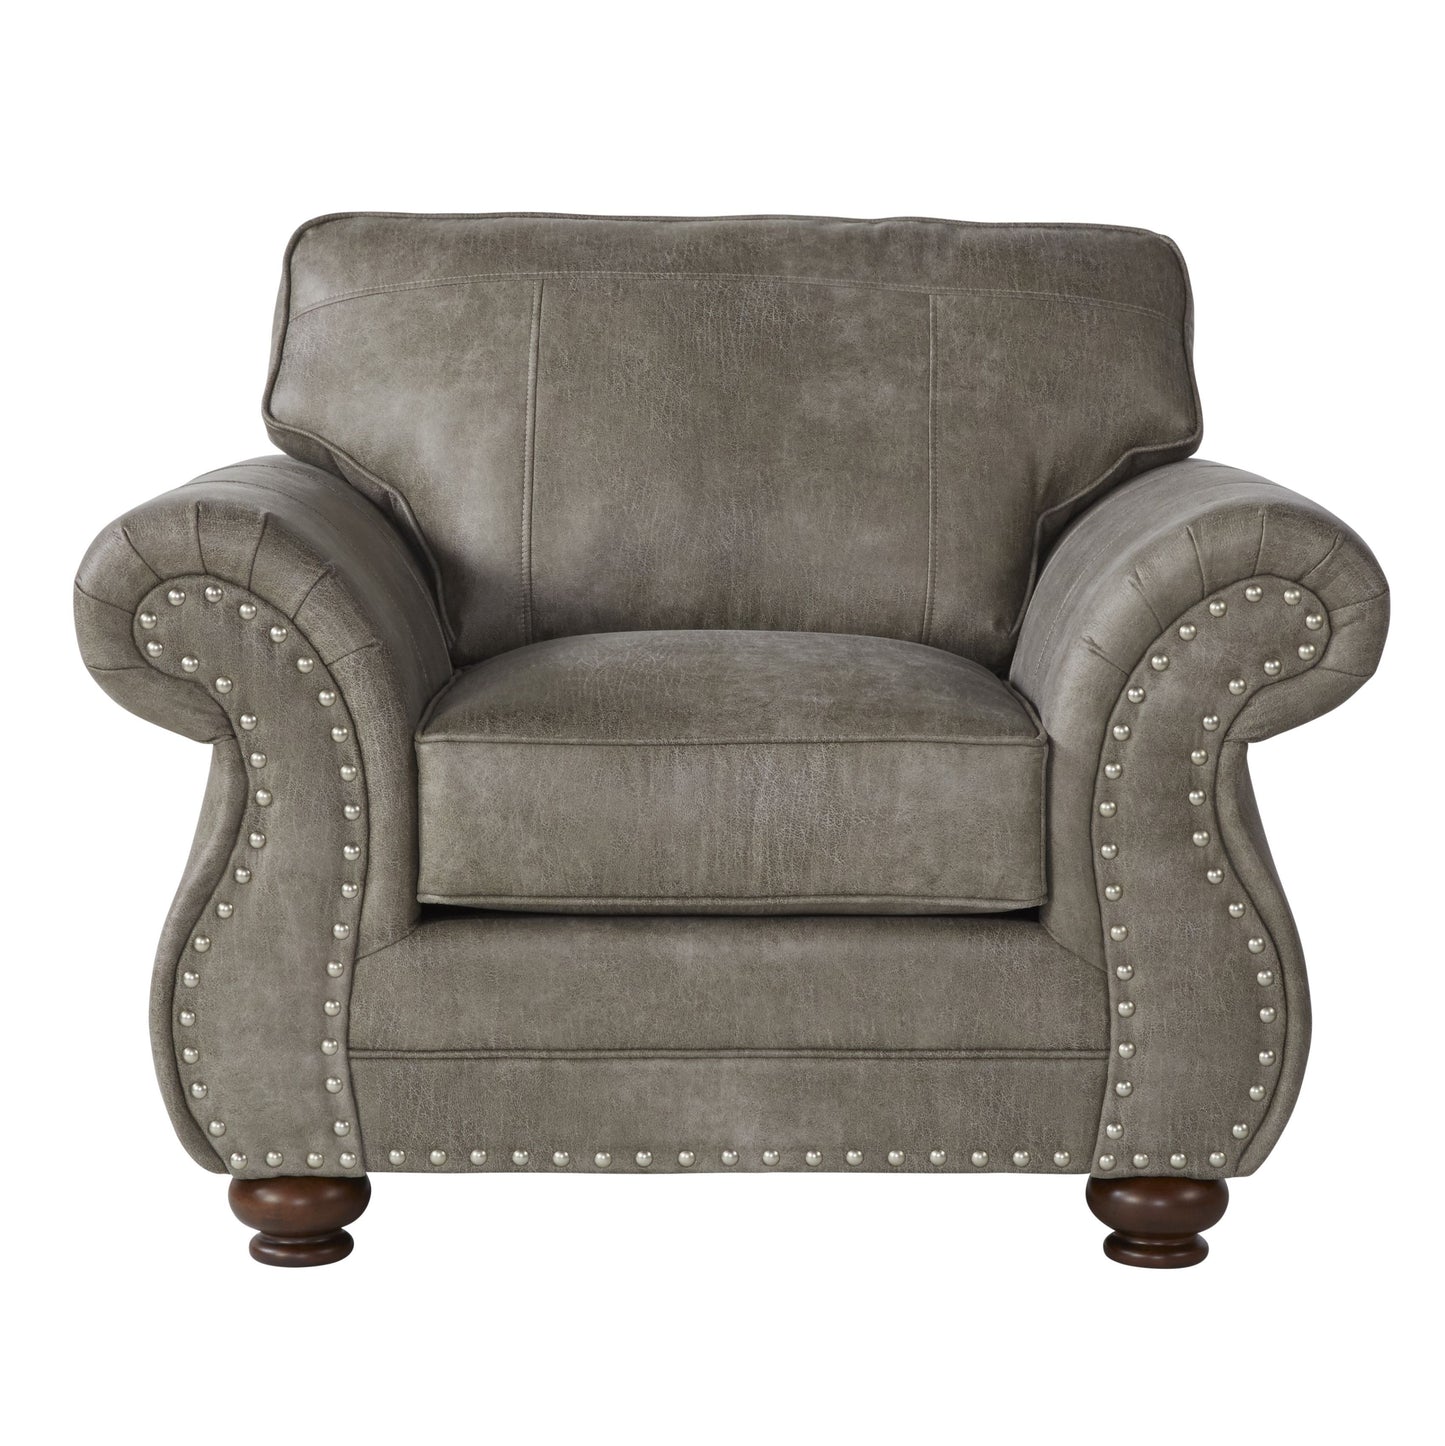 Leinster Faux Leather Upholstered Nailhead Chair and Ottoman in Stone Gray